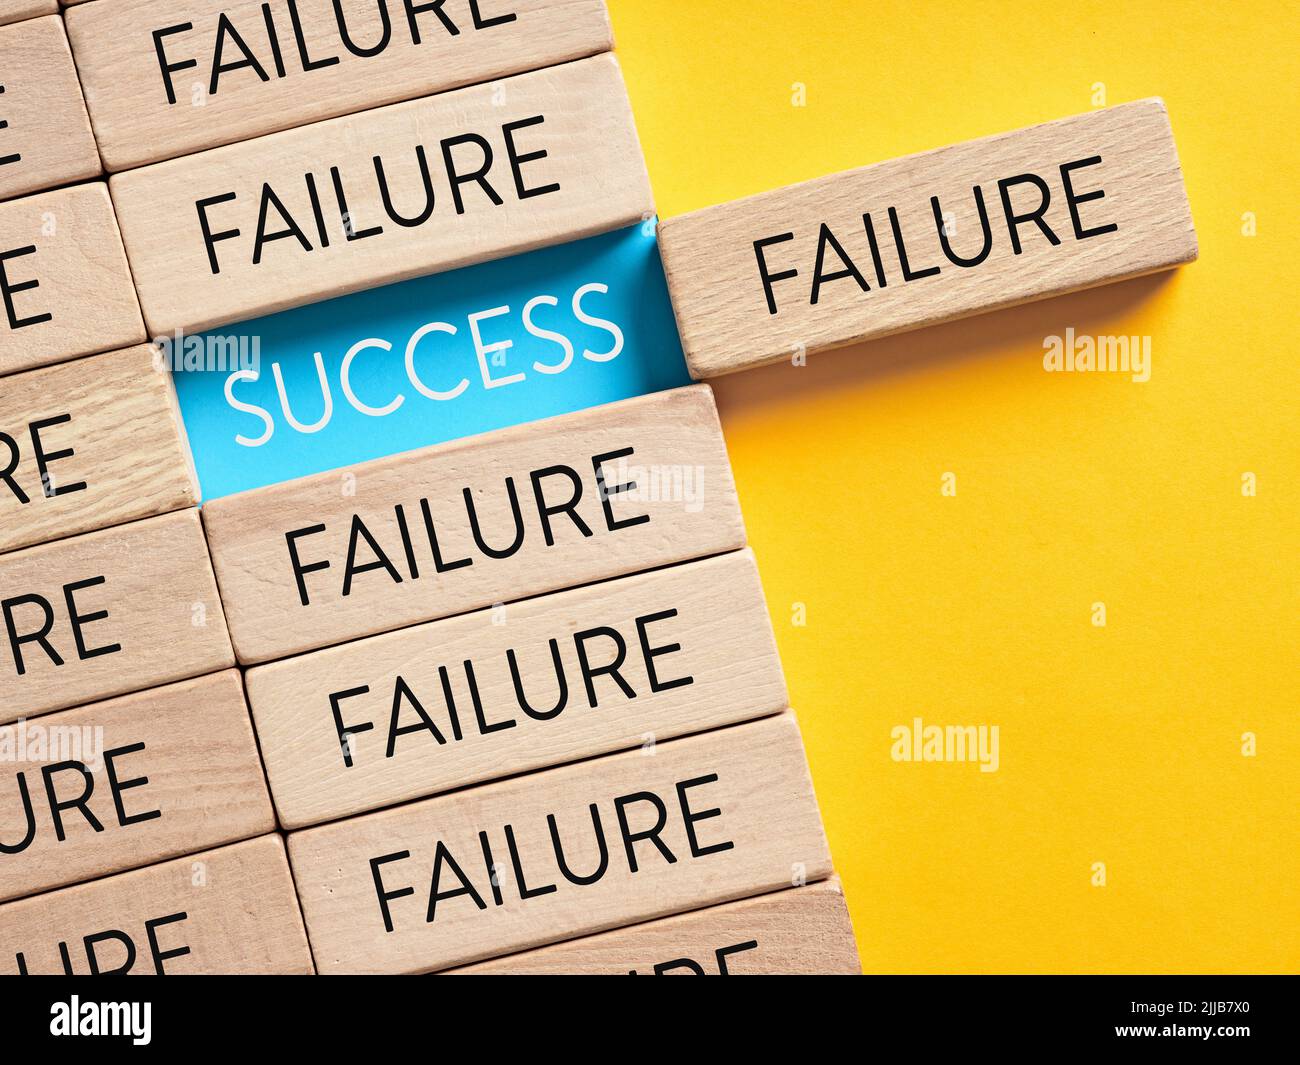 Success and failure alternative options. Reaching to success after many failures or learning from mistakes concept. Stock Photo